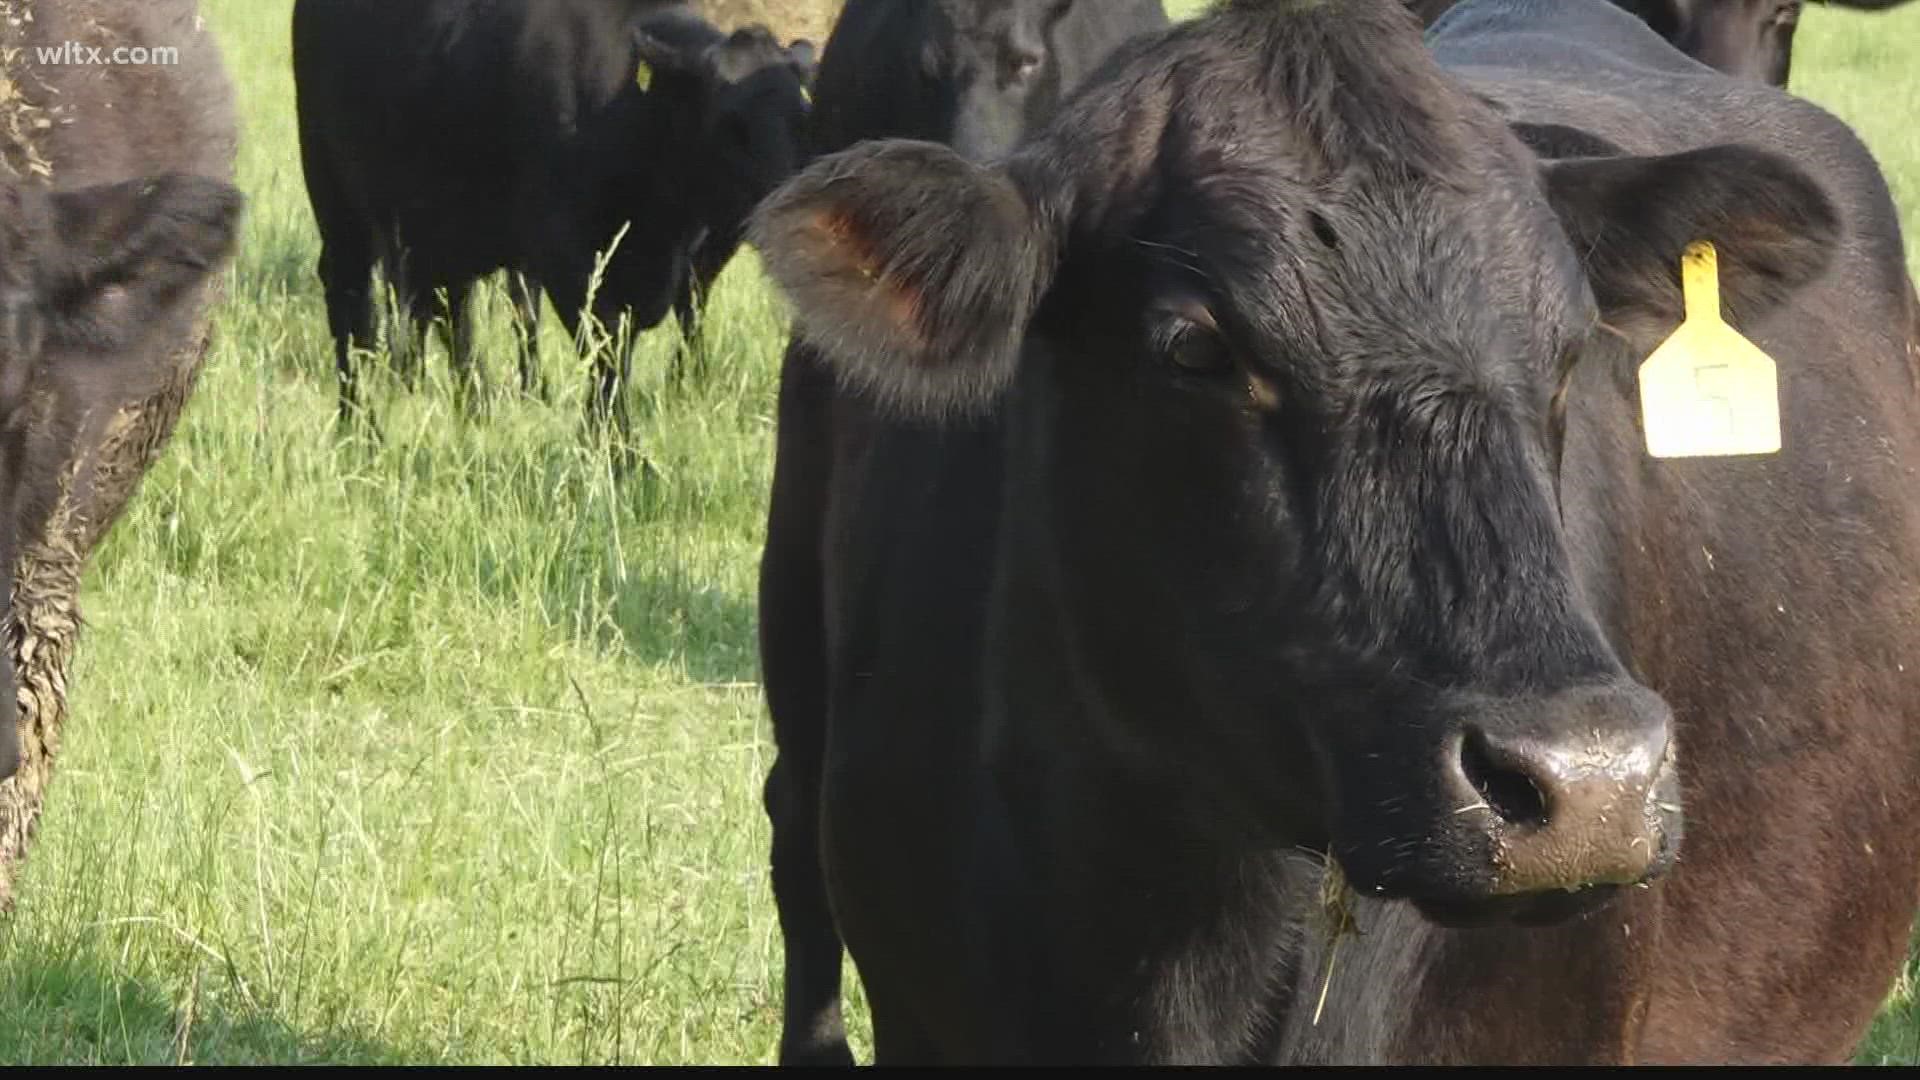 You may have noticed the price of beef is skyrocketing. Here's how local farmers say they are being impacted.